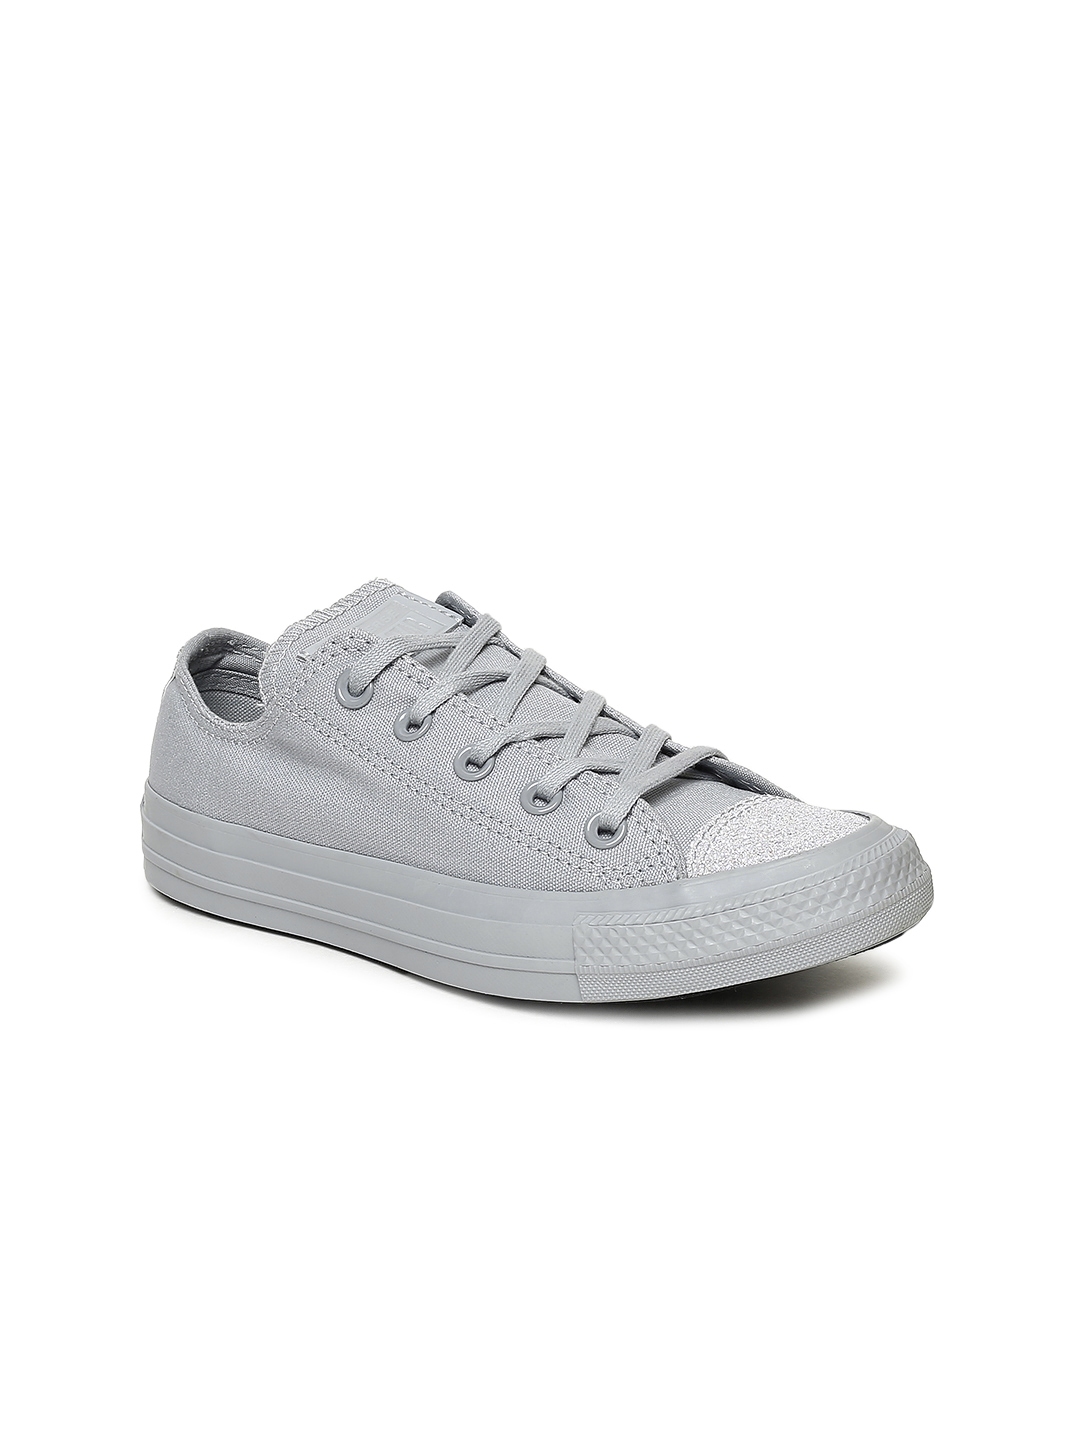 converse low tops grey womens